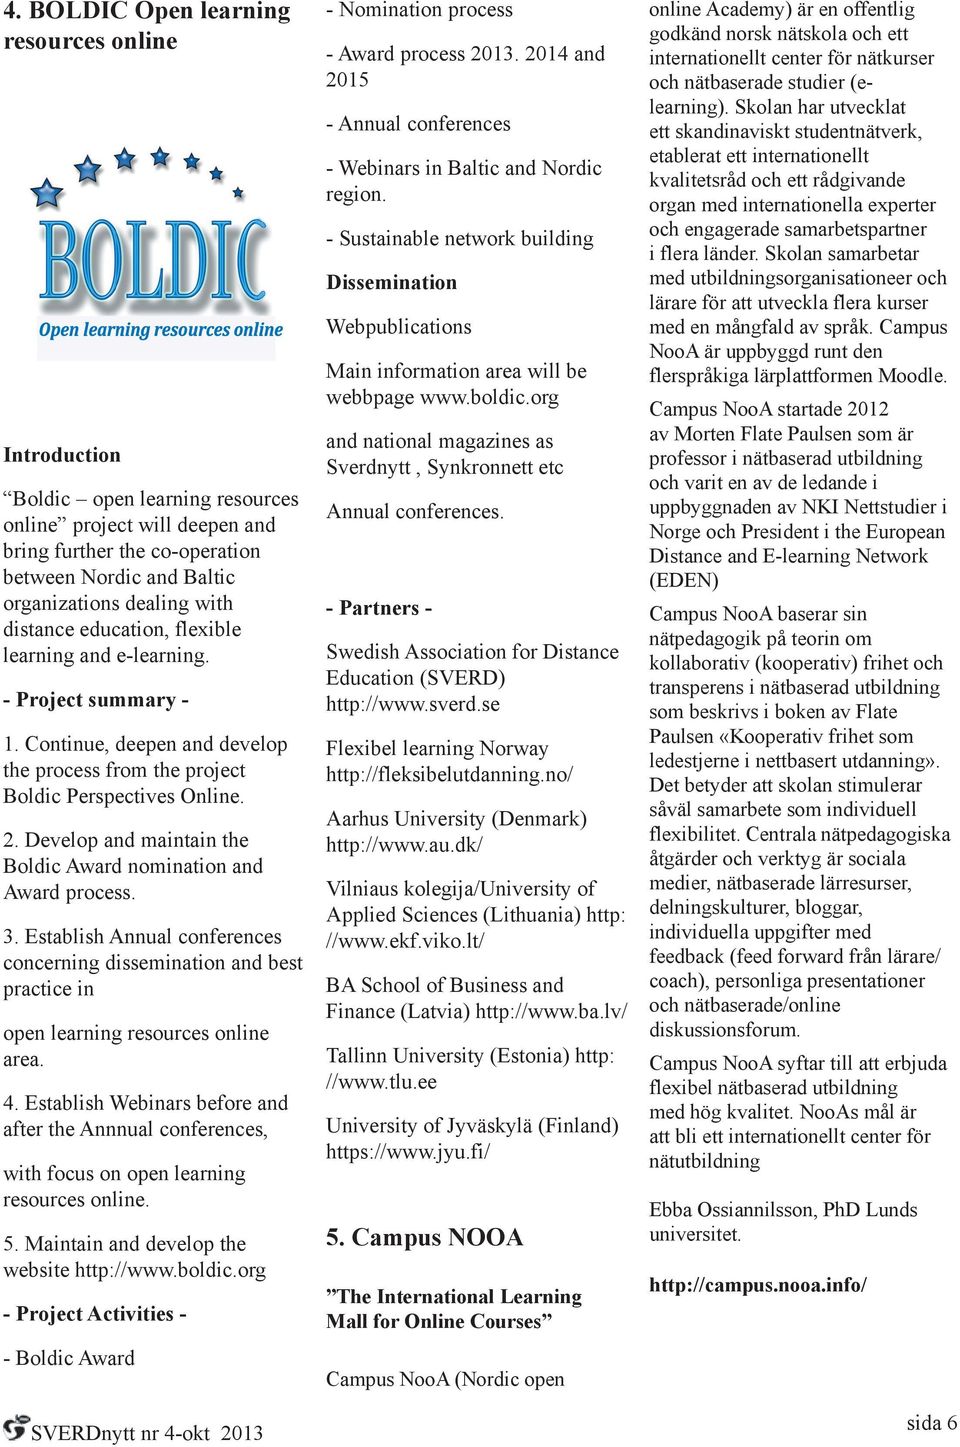 Develop and maintain the Boldic Award nomination and Award process. 3. Establish Annual conferences concerning dissemination and best practice in open learning resources online area. 4.